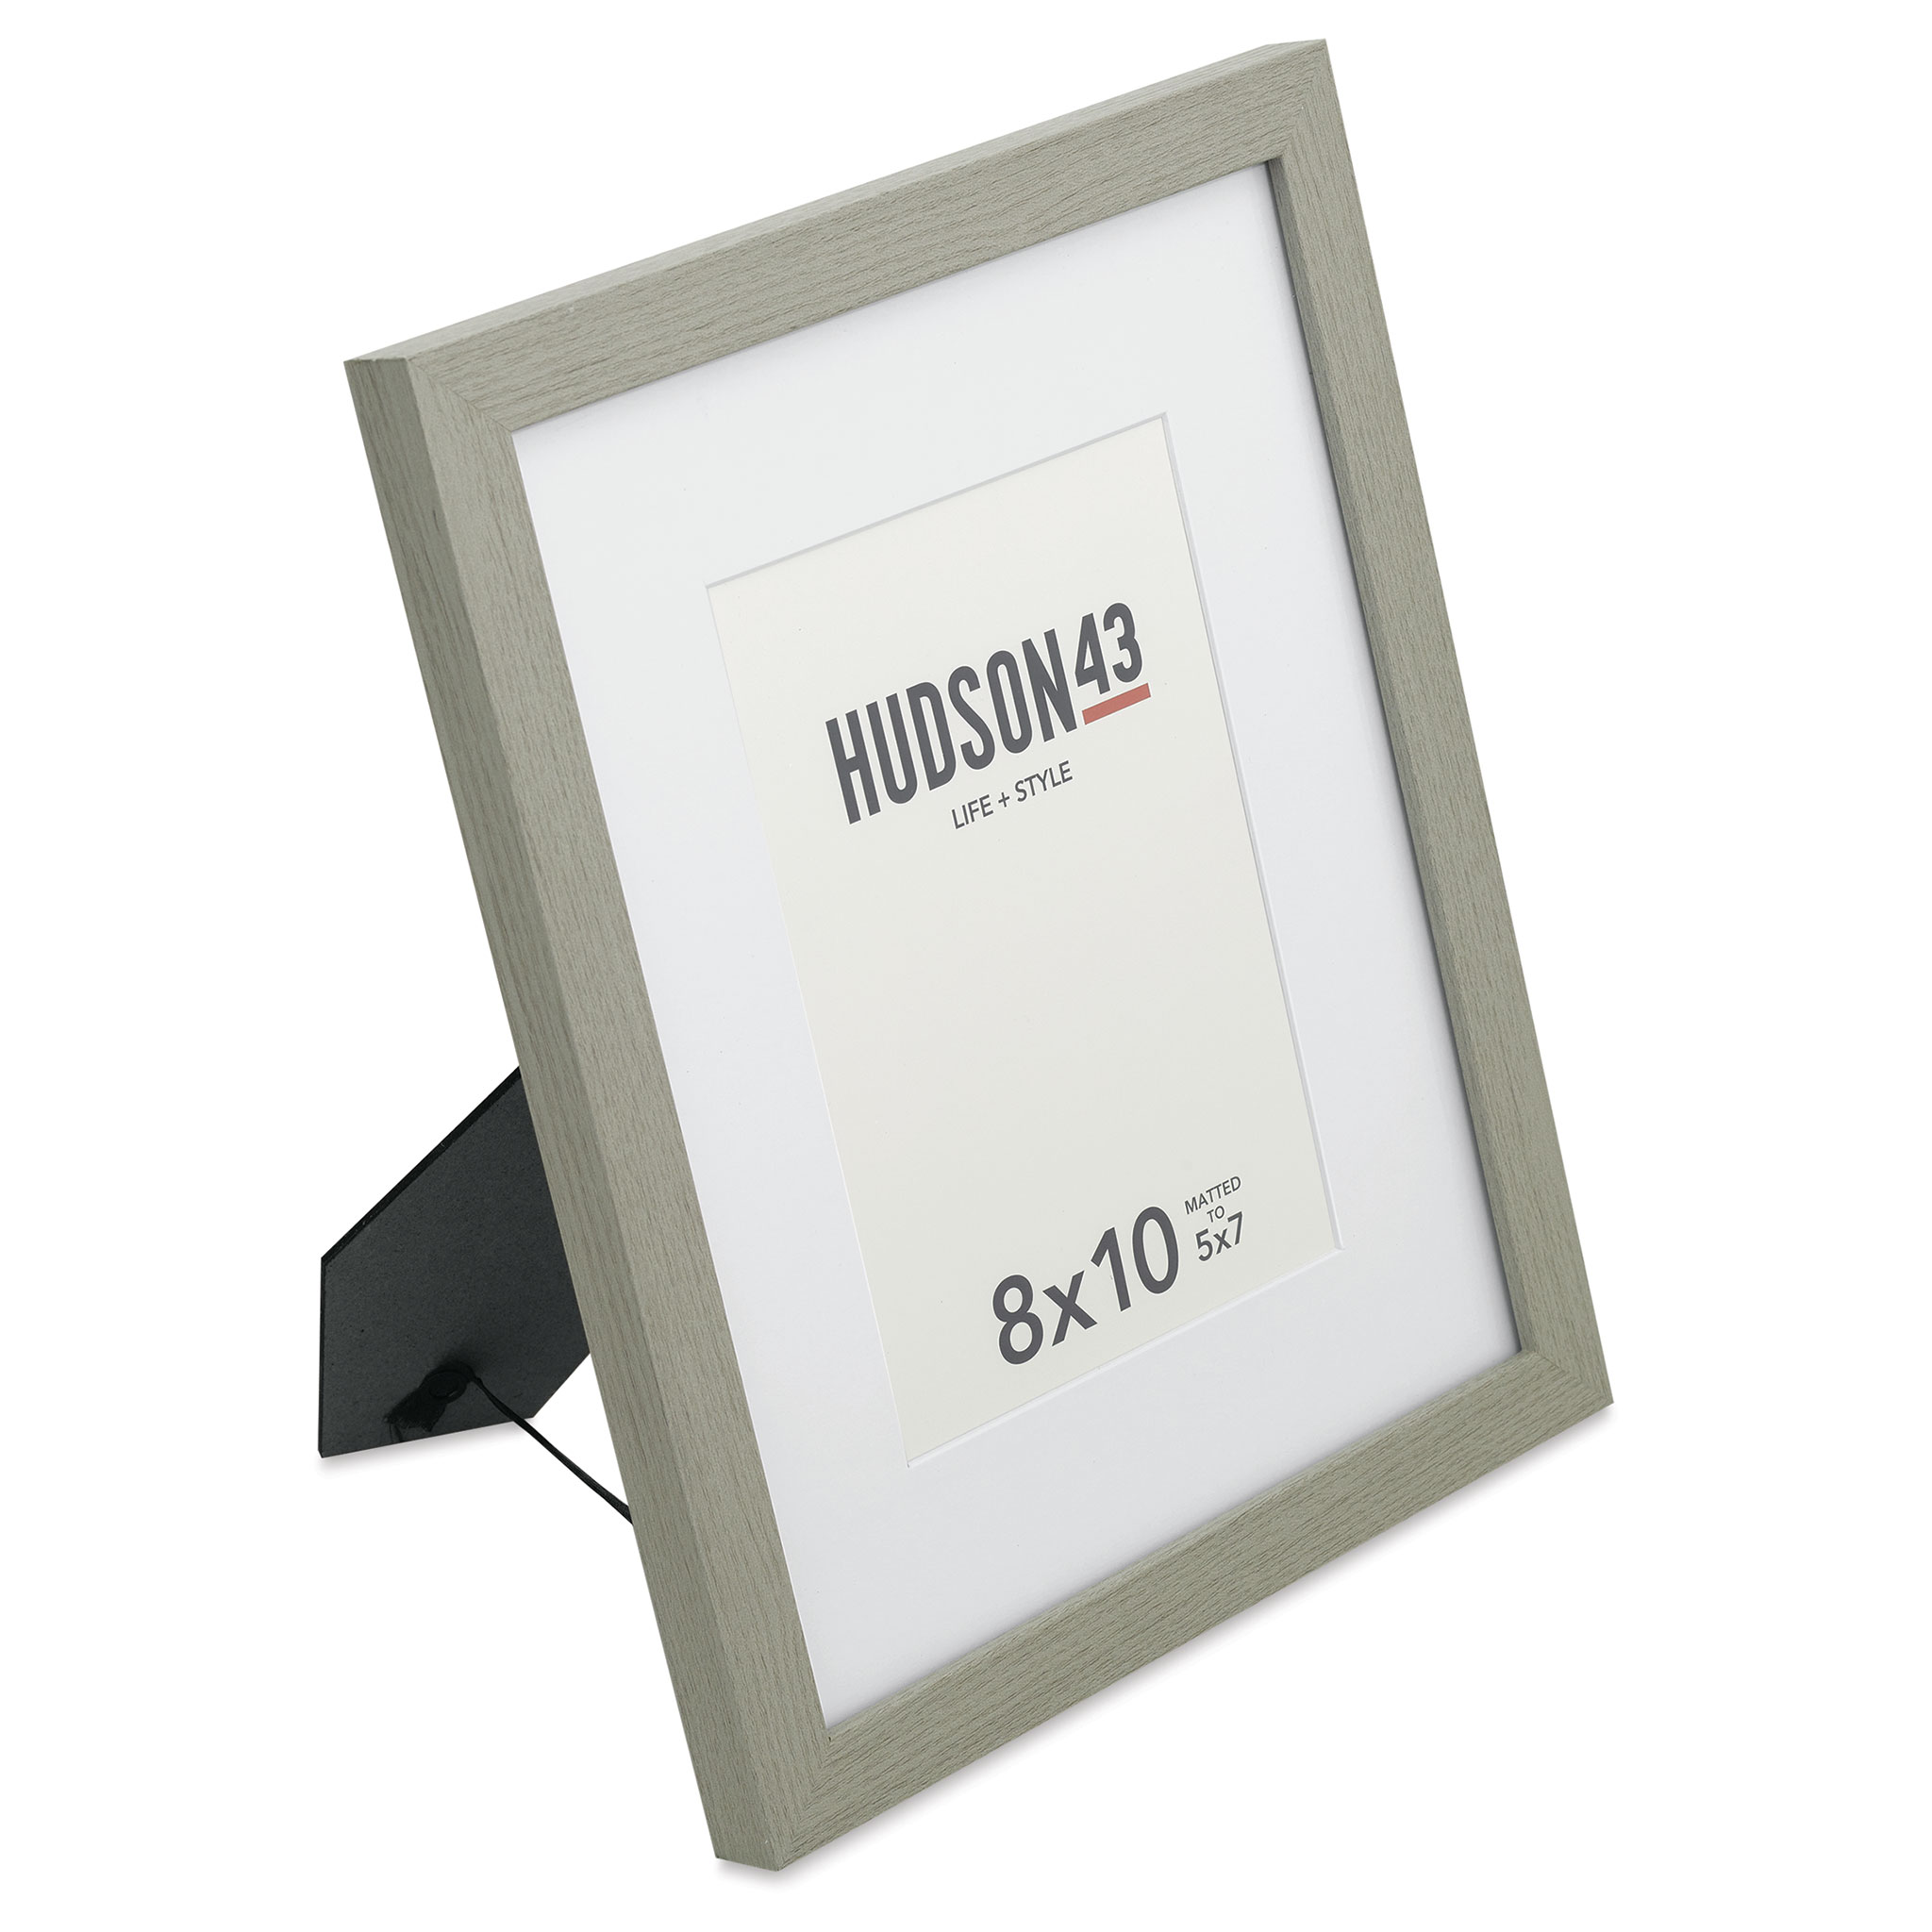 Hudson 43 Gallery Frames with Mats